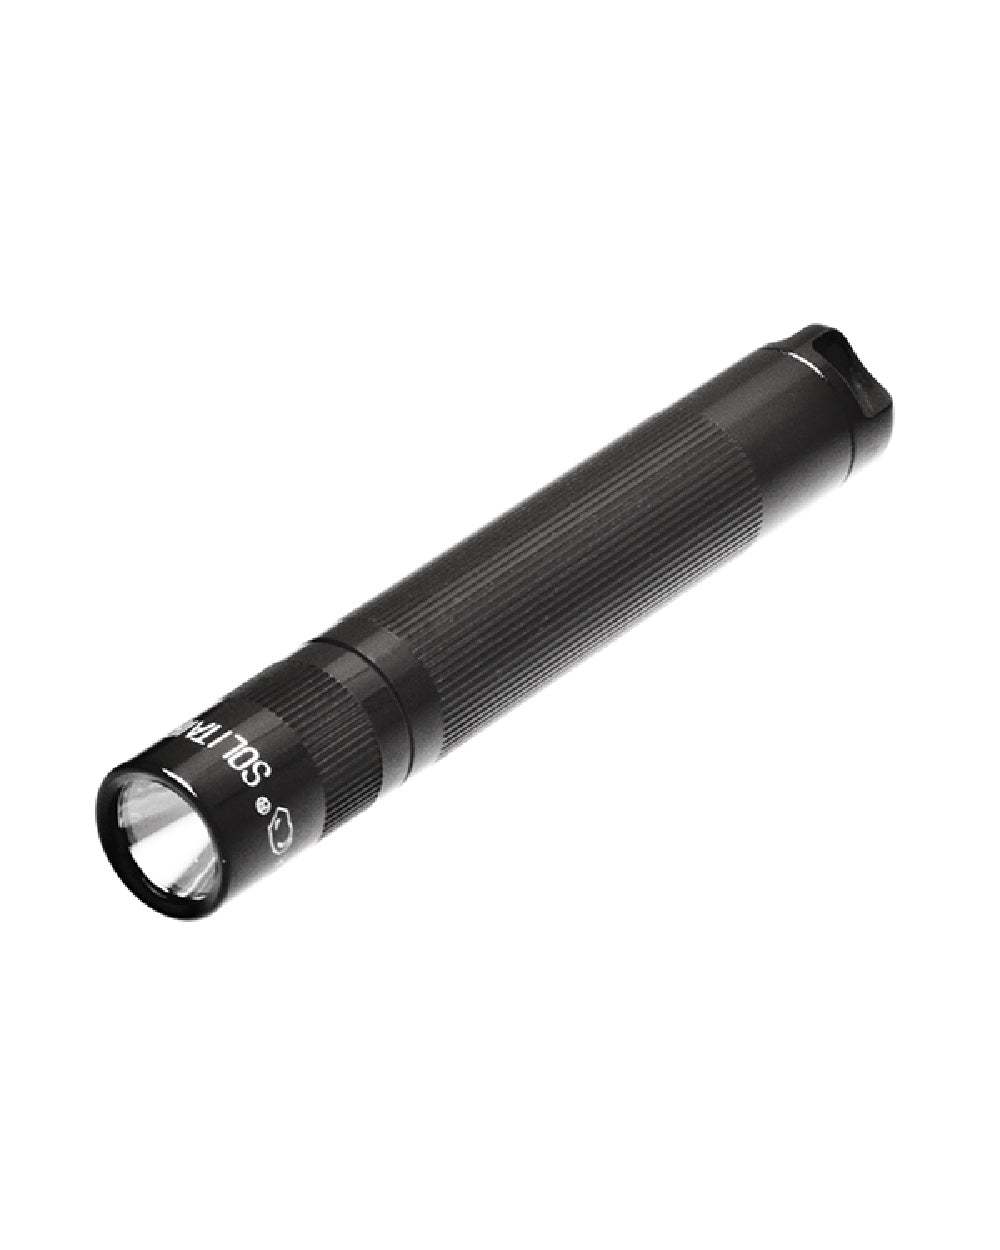 Maglite Solitaire 1-Cell AAA LED Torch in Black 